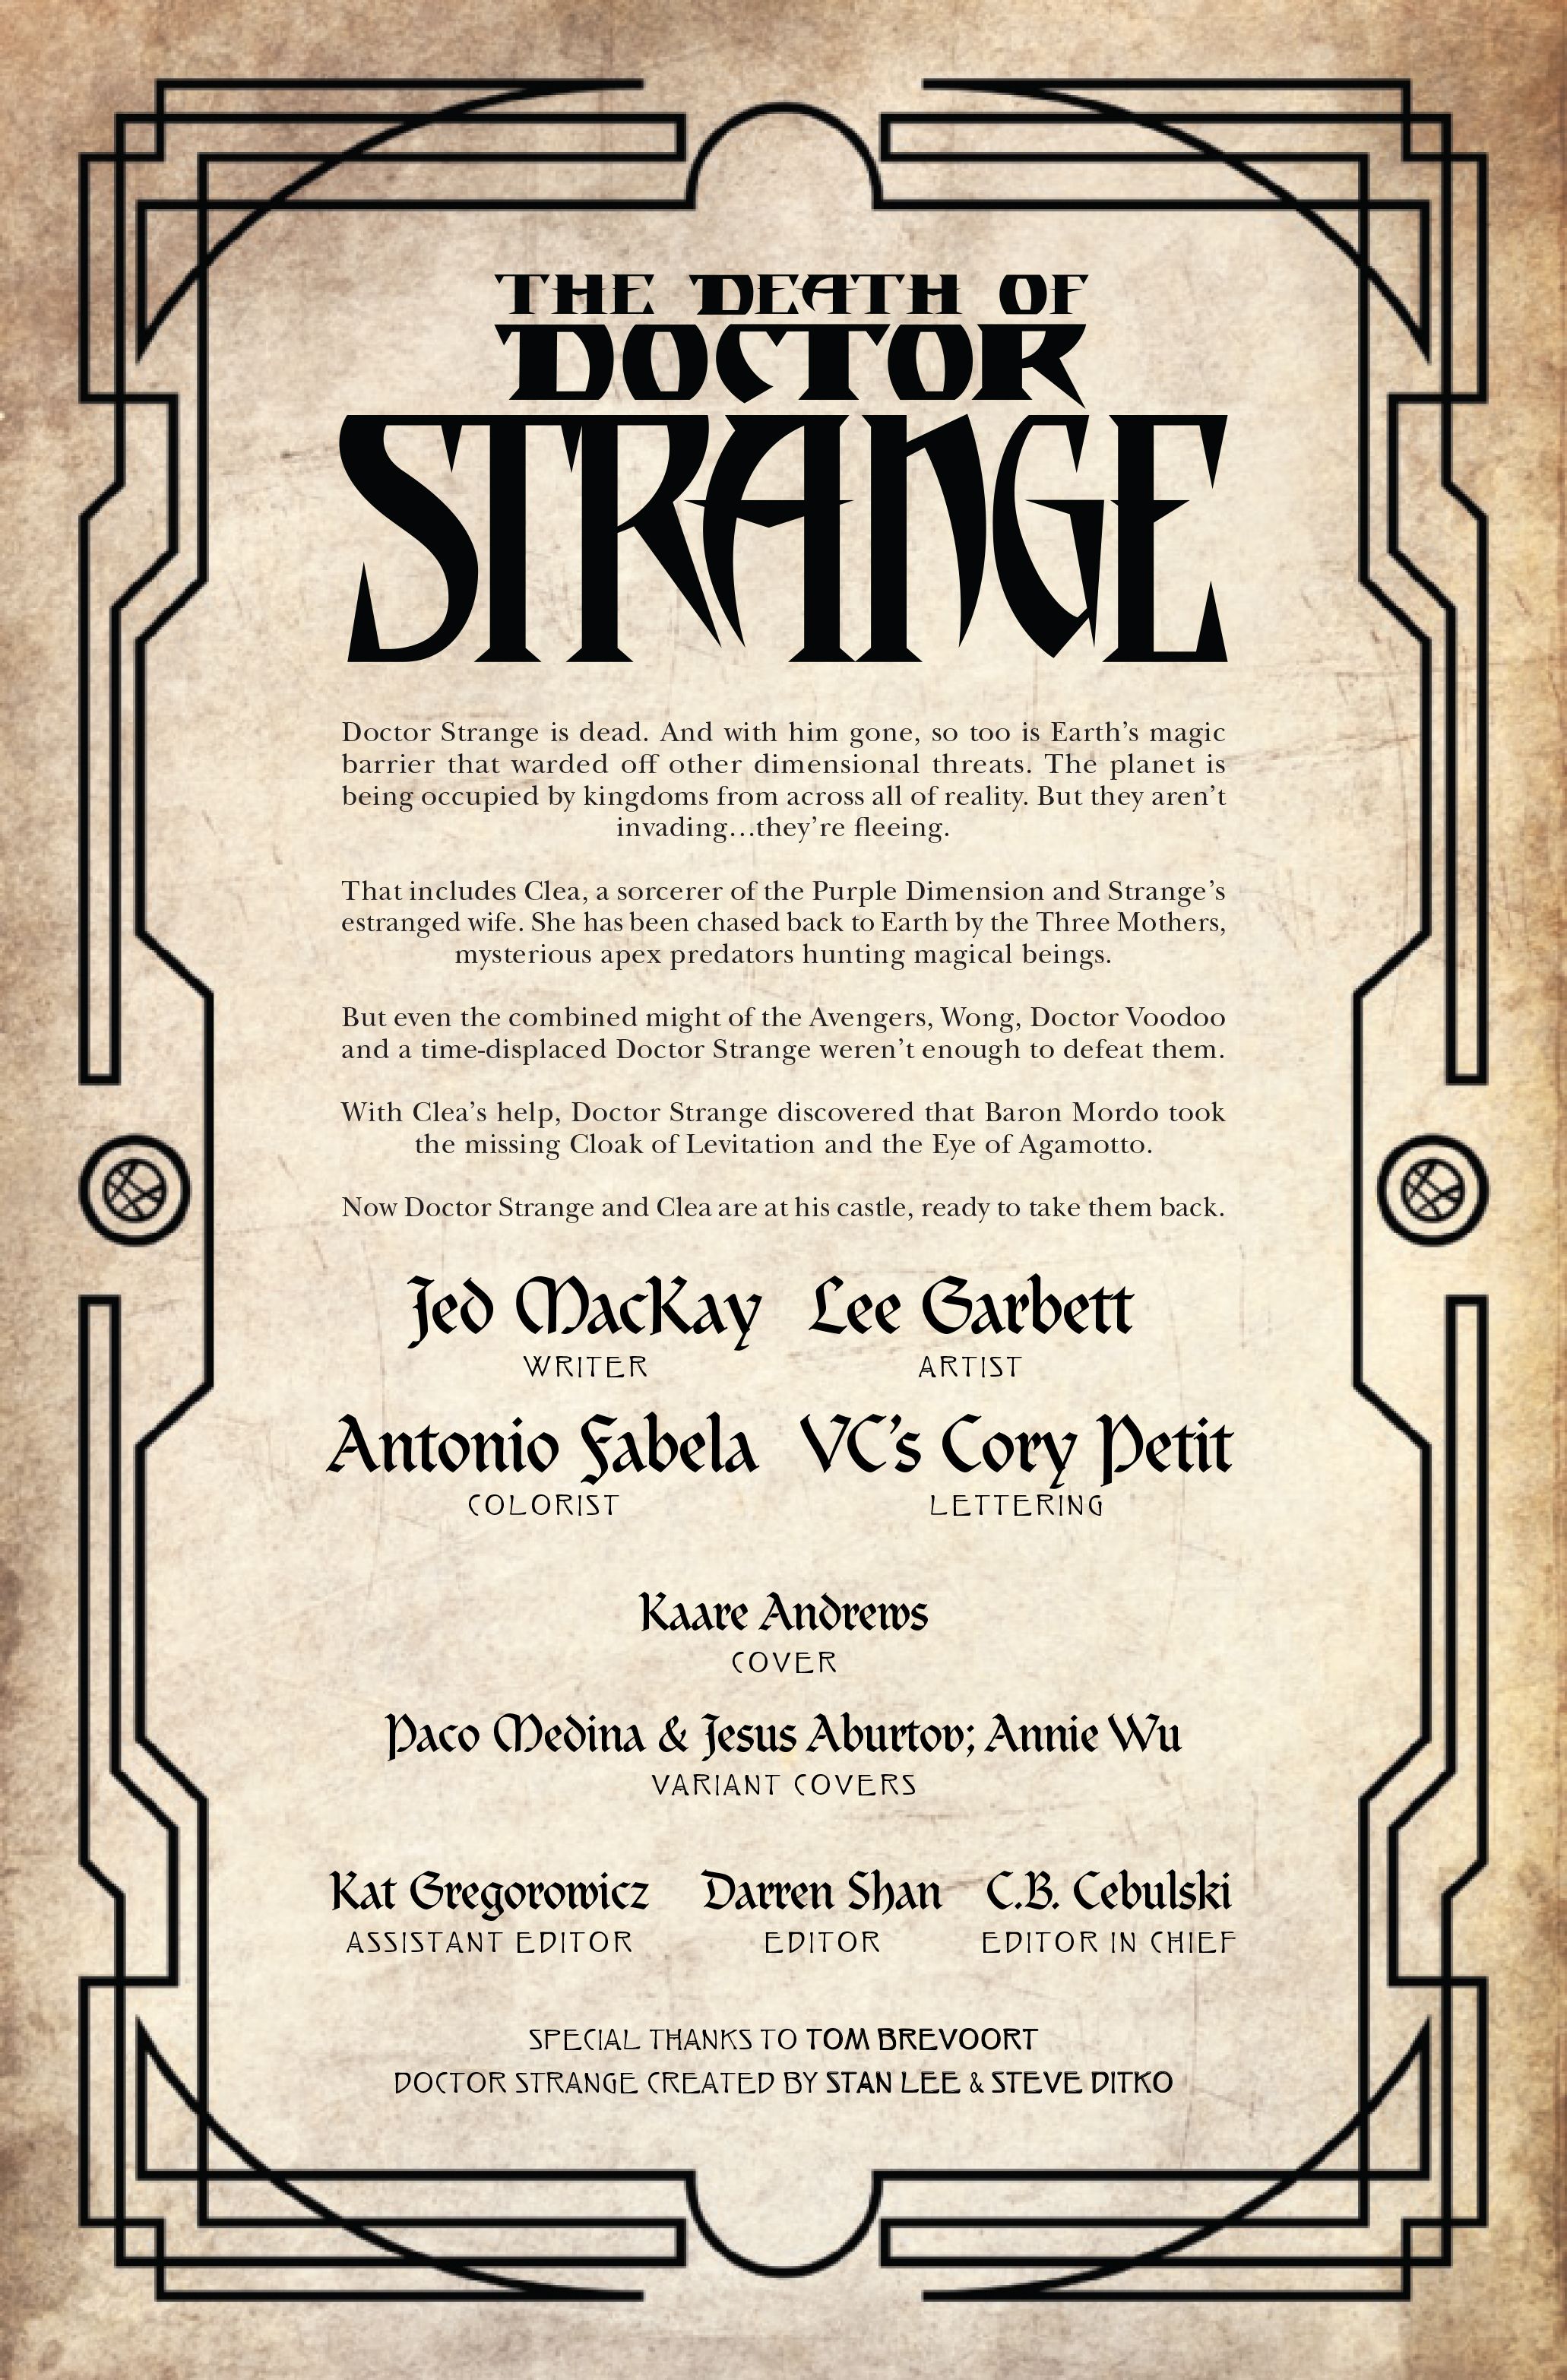 Credits page for the Death of Doctor Strange #4, by Jed MacKay, Lee Garbett, Antonio Fabela and VC's Cory Petit.